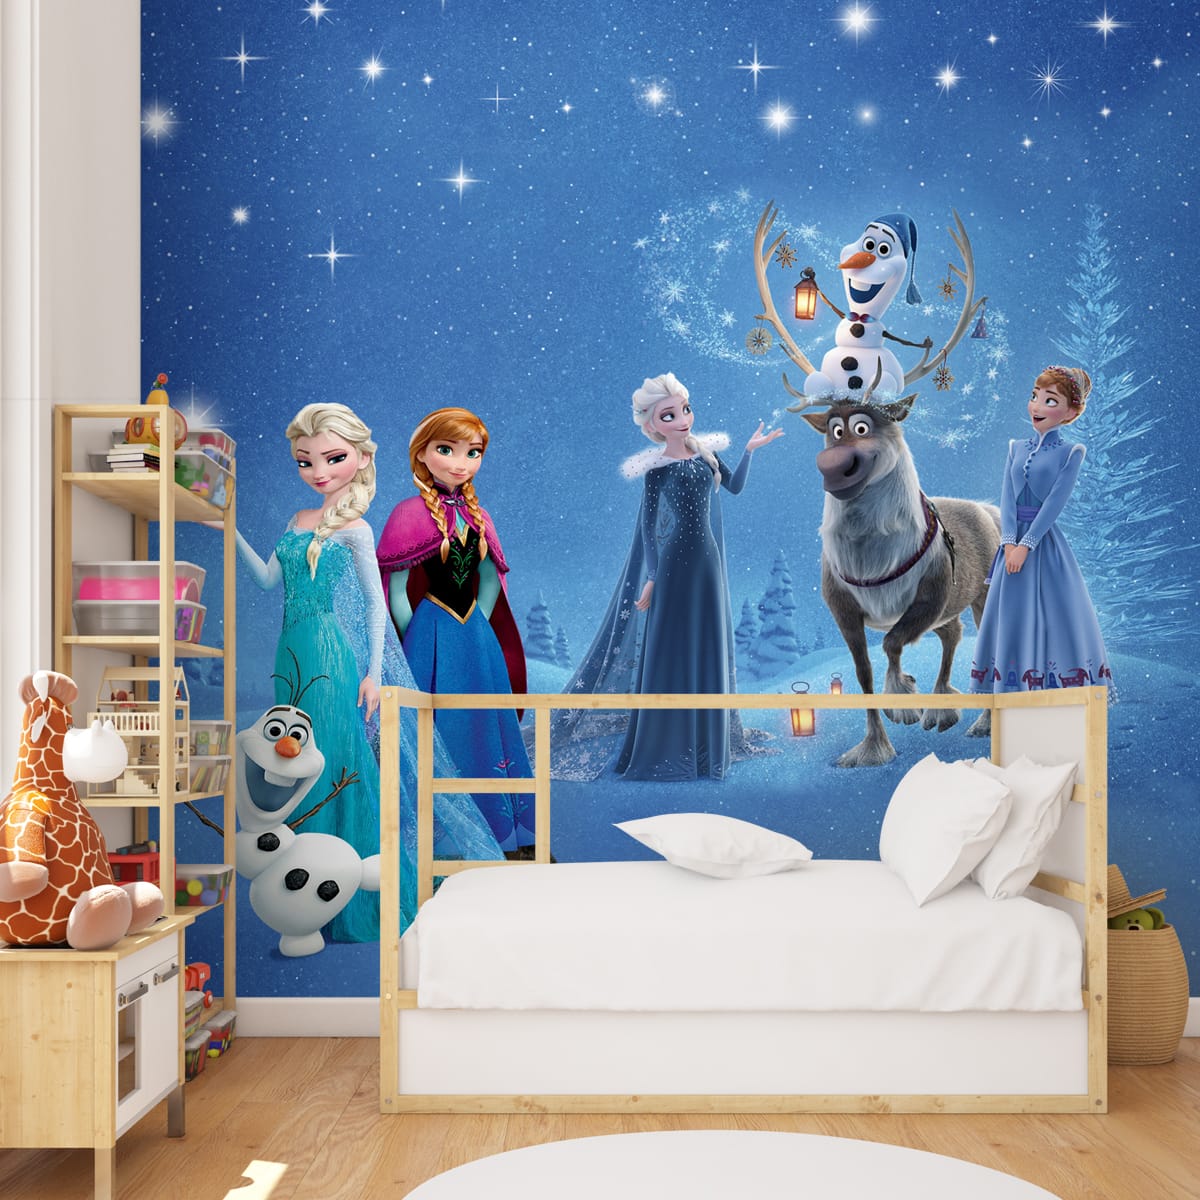 Cute Frozen Movie Wall Mural, Customised for Kids Room